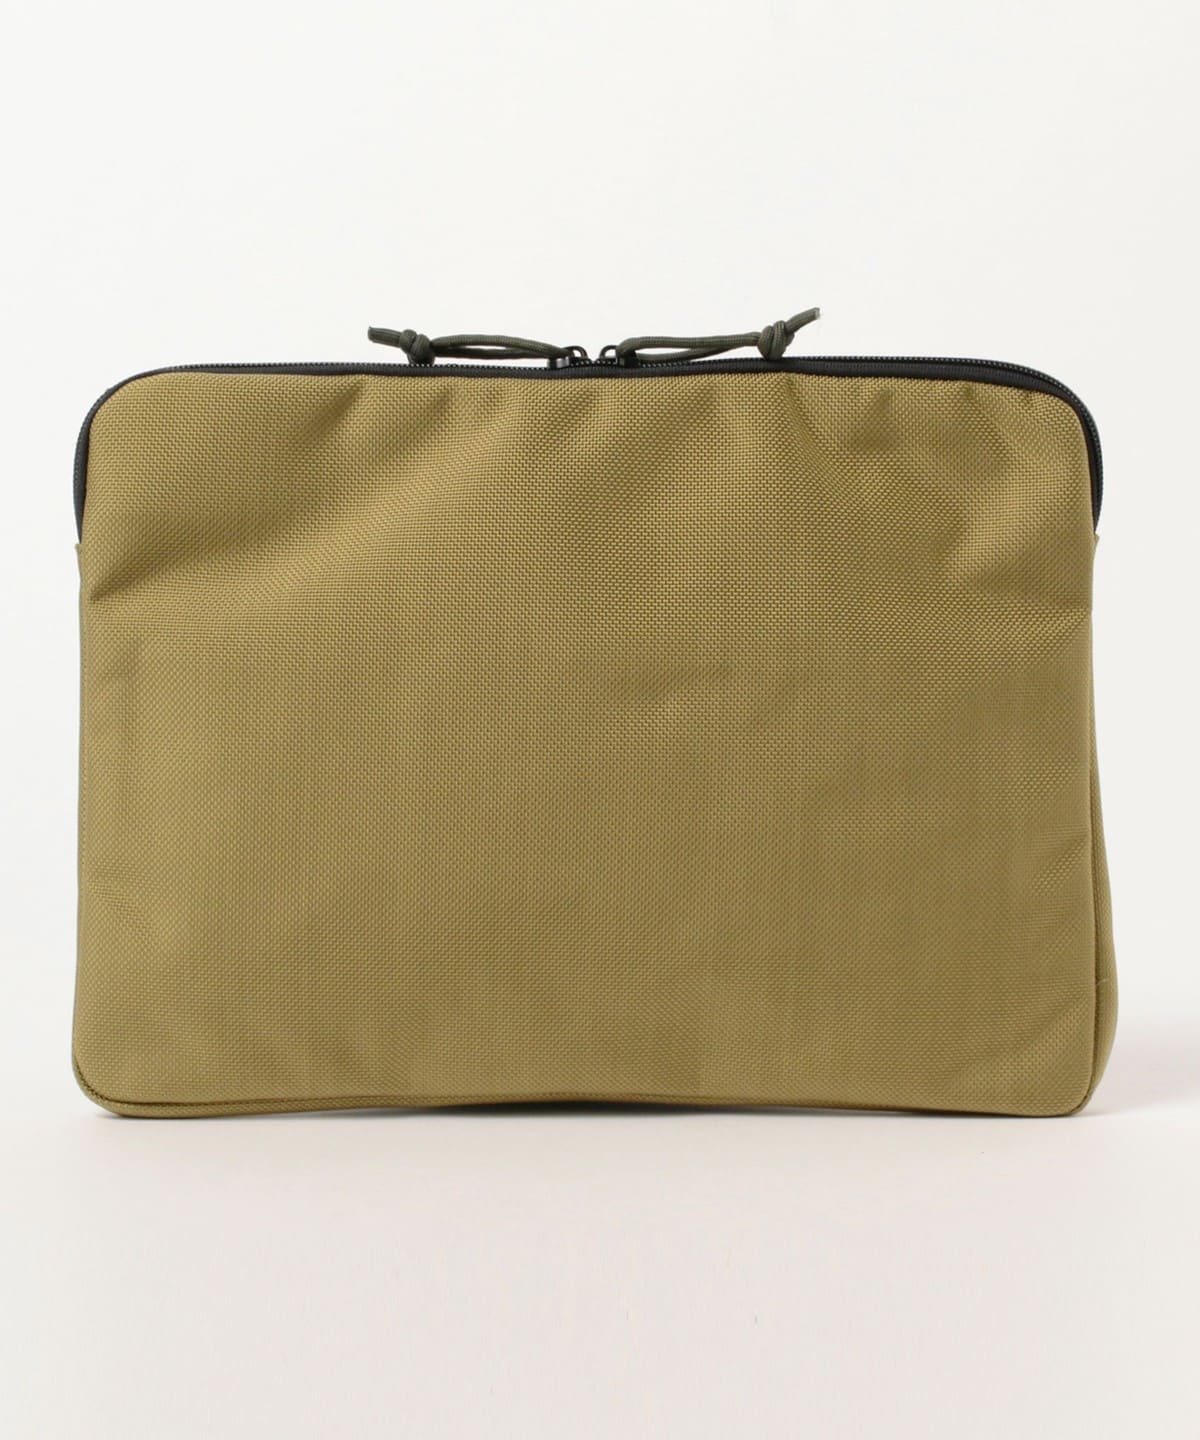 BEAMS PLUS（ビームス プラス）BRIEFING / A4 CLUTCH KHAKI（バッグ 